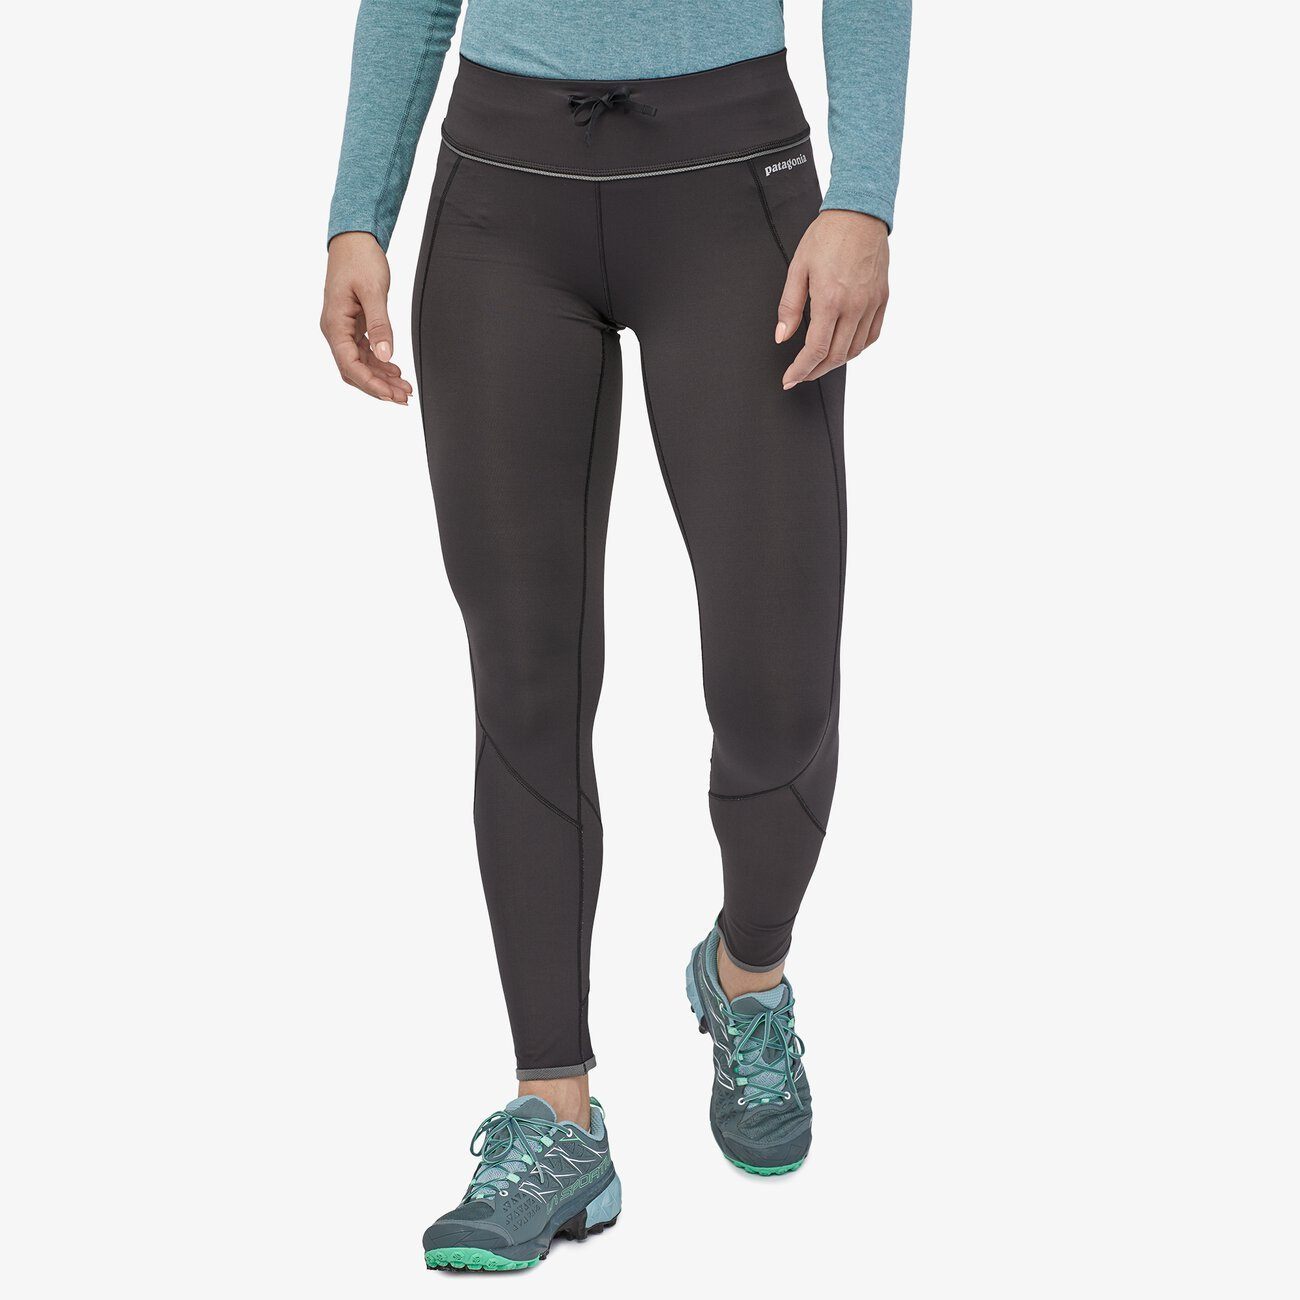 New with tags! Women' s Patagonia Pack Out Tights.